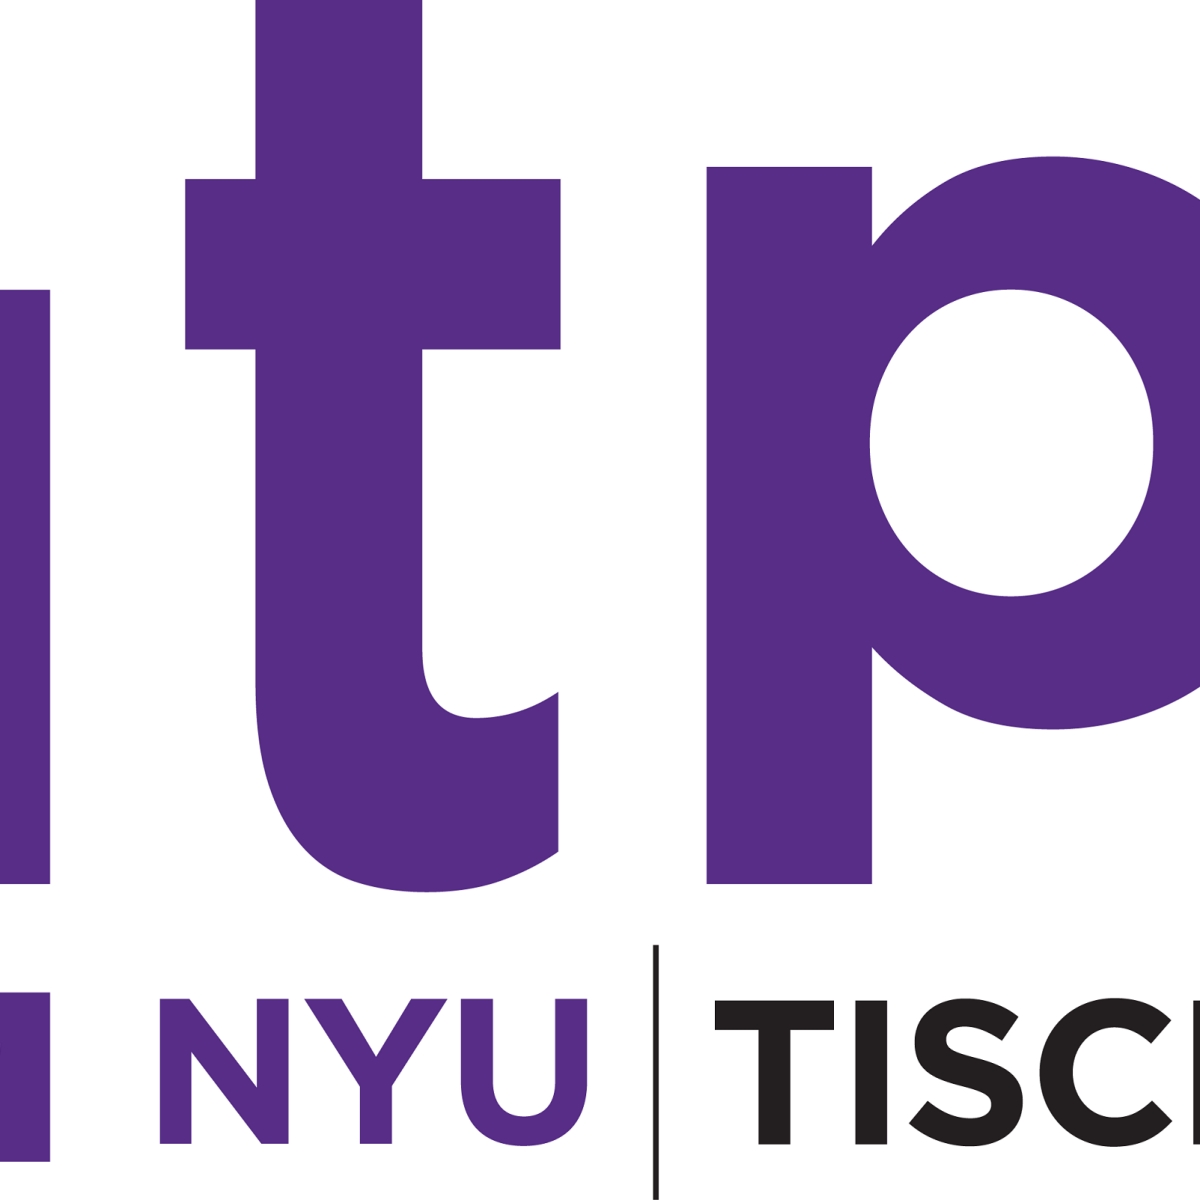 Image of ITP logo in purple letters on a white background.